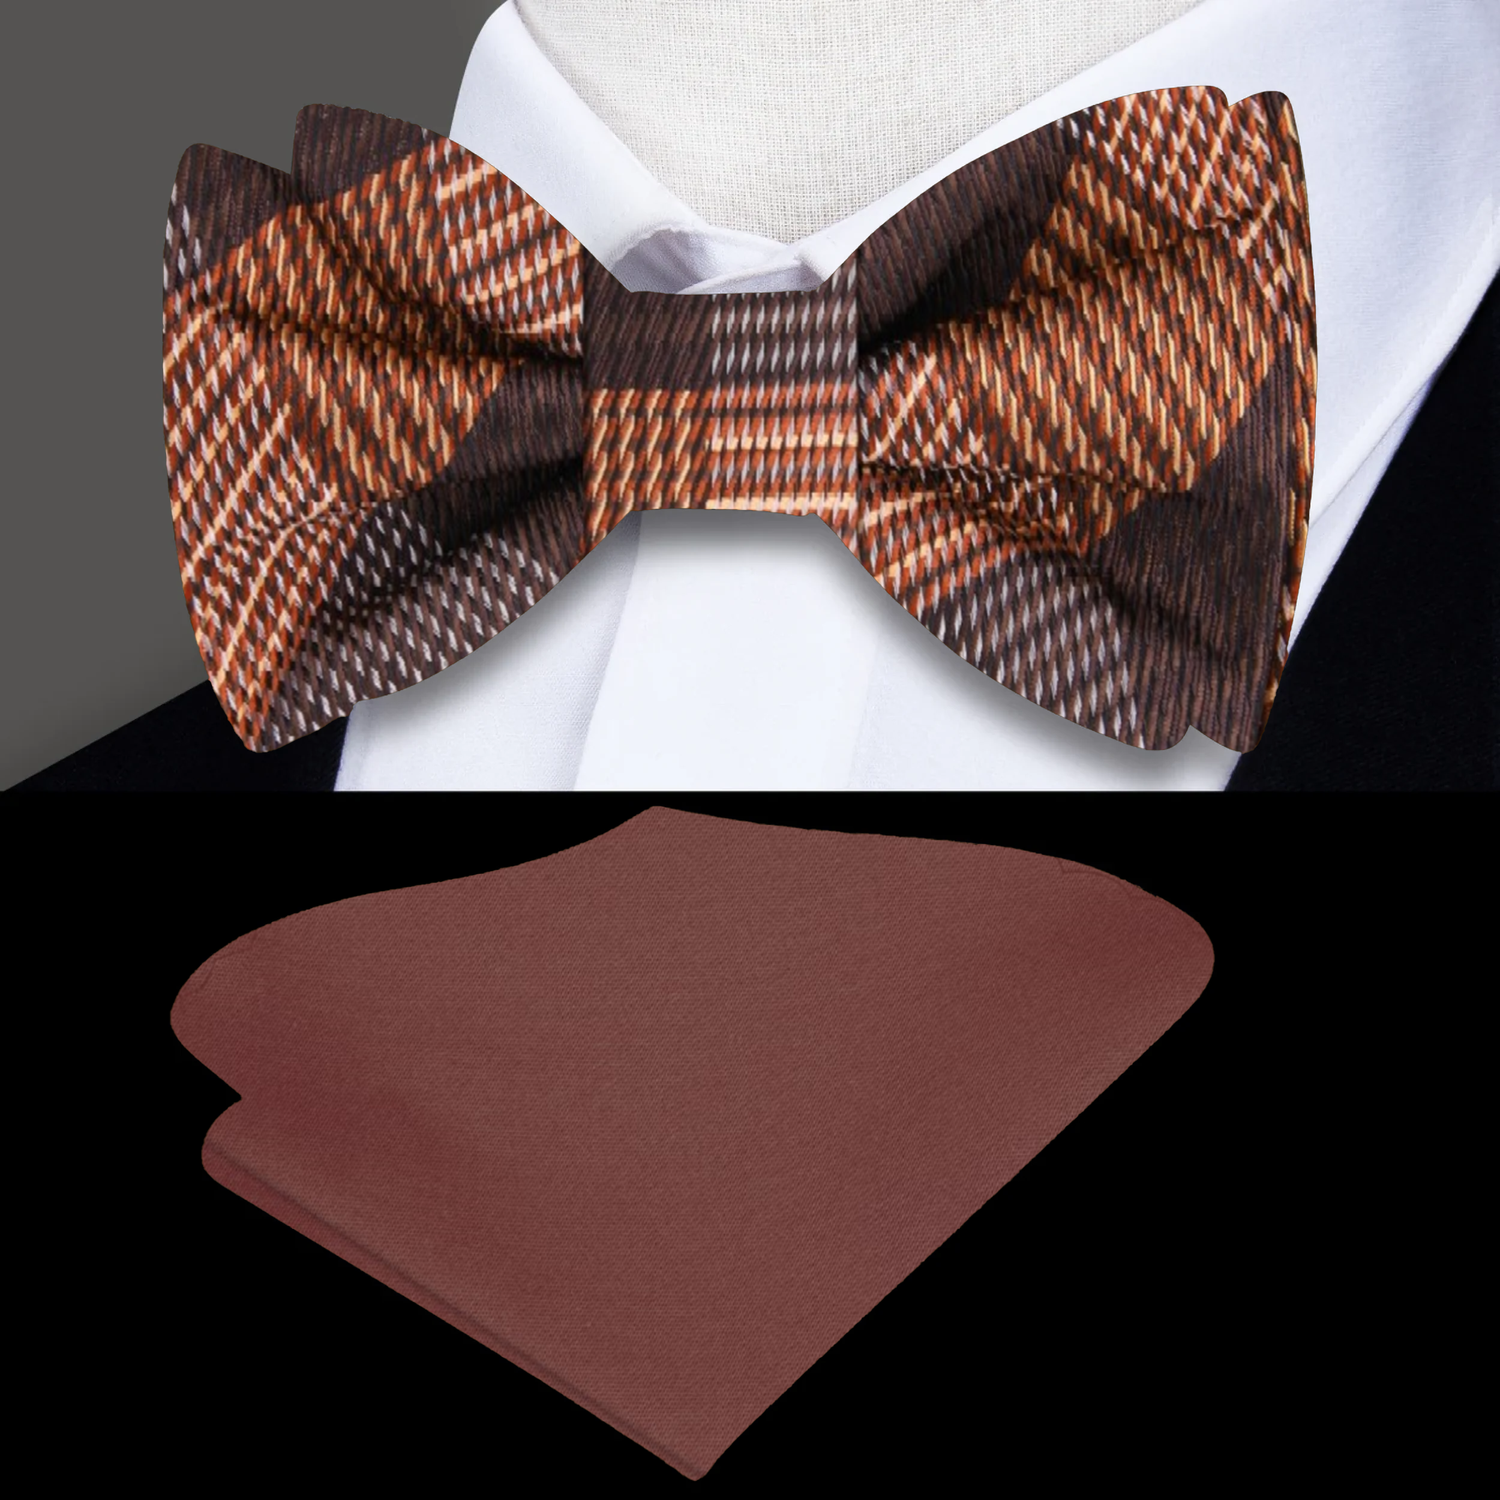 Main: Brown and Orange Plaid Bow Tie and Brown Square